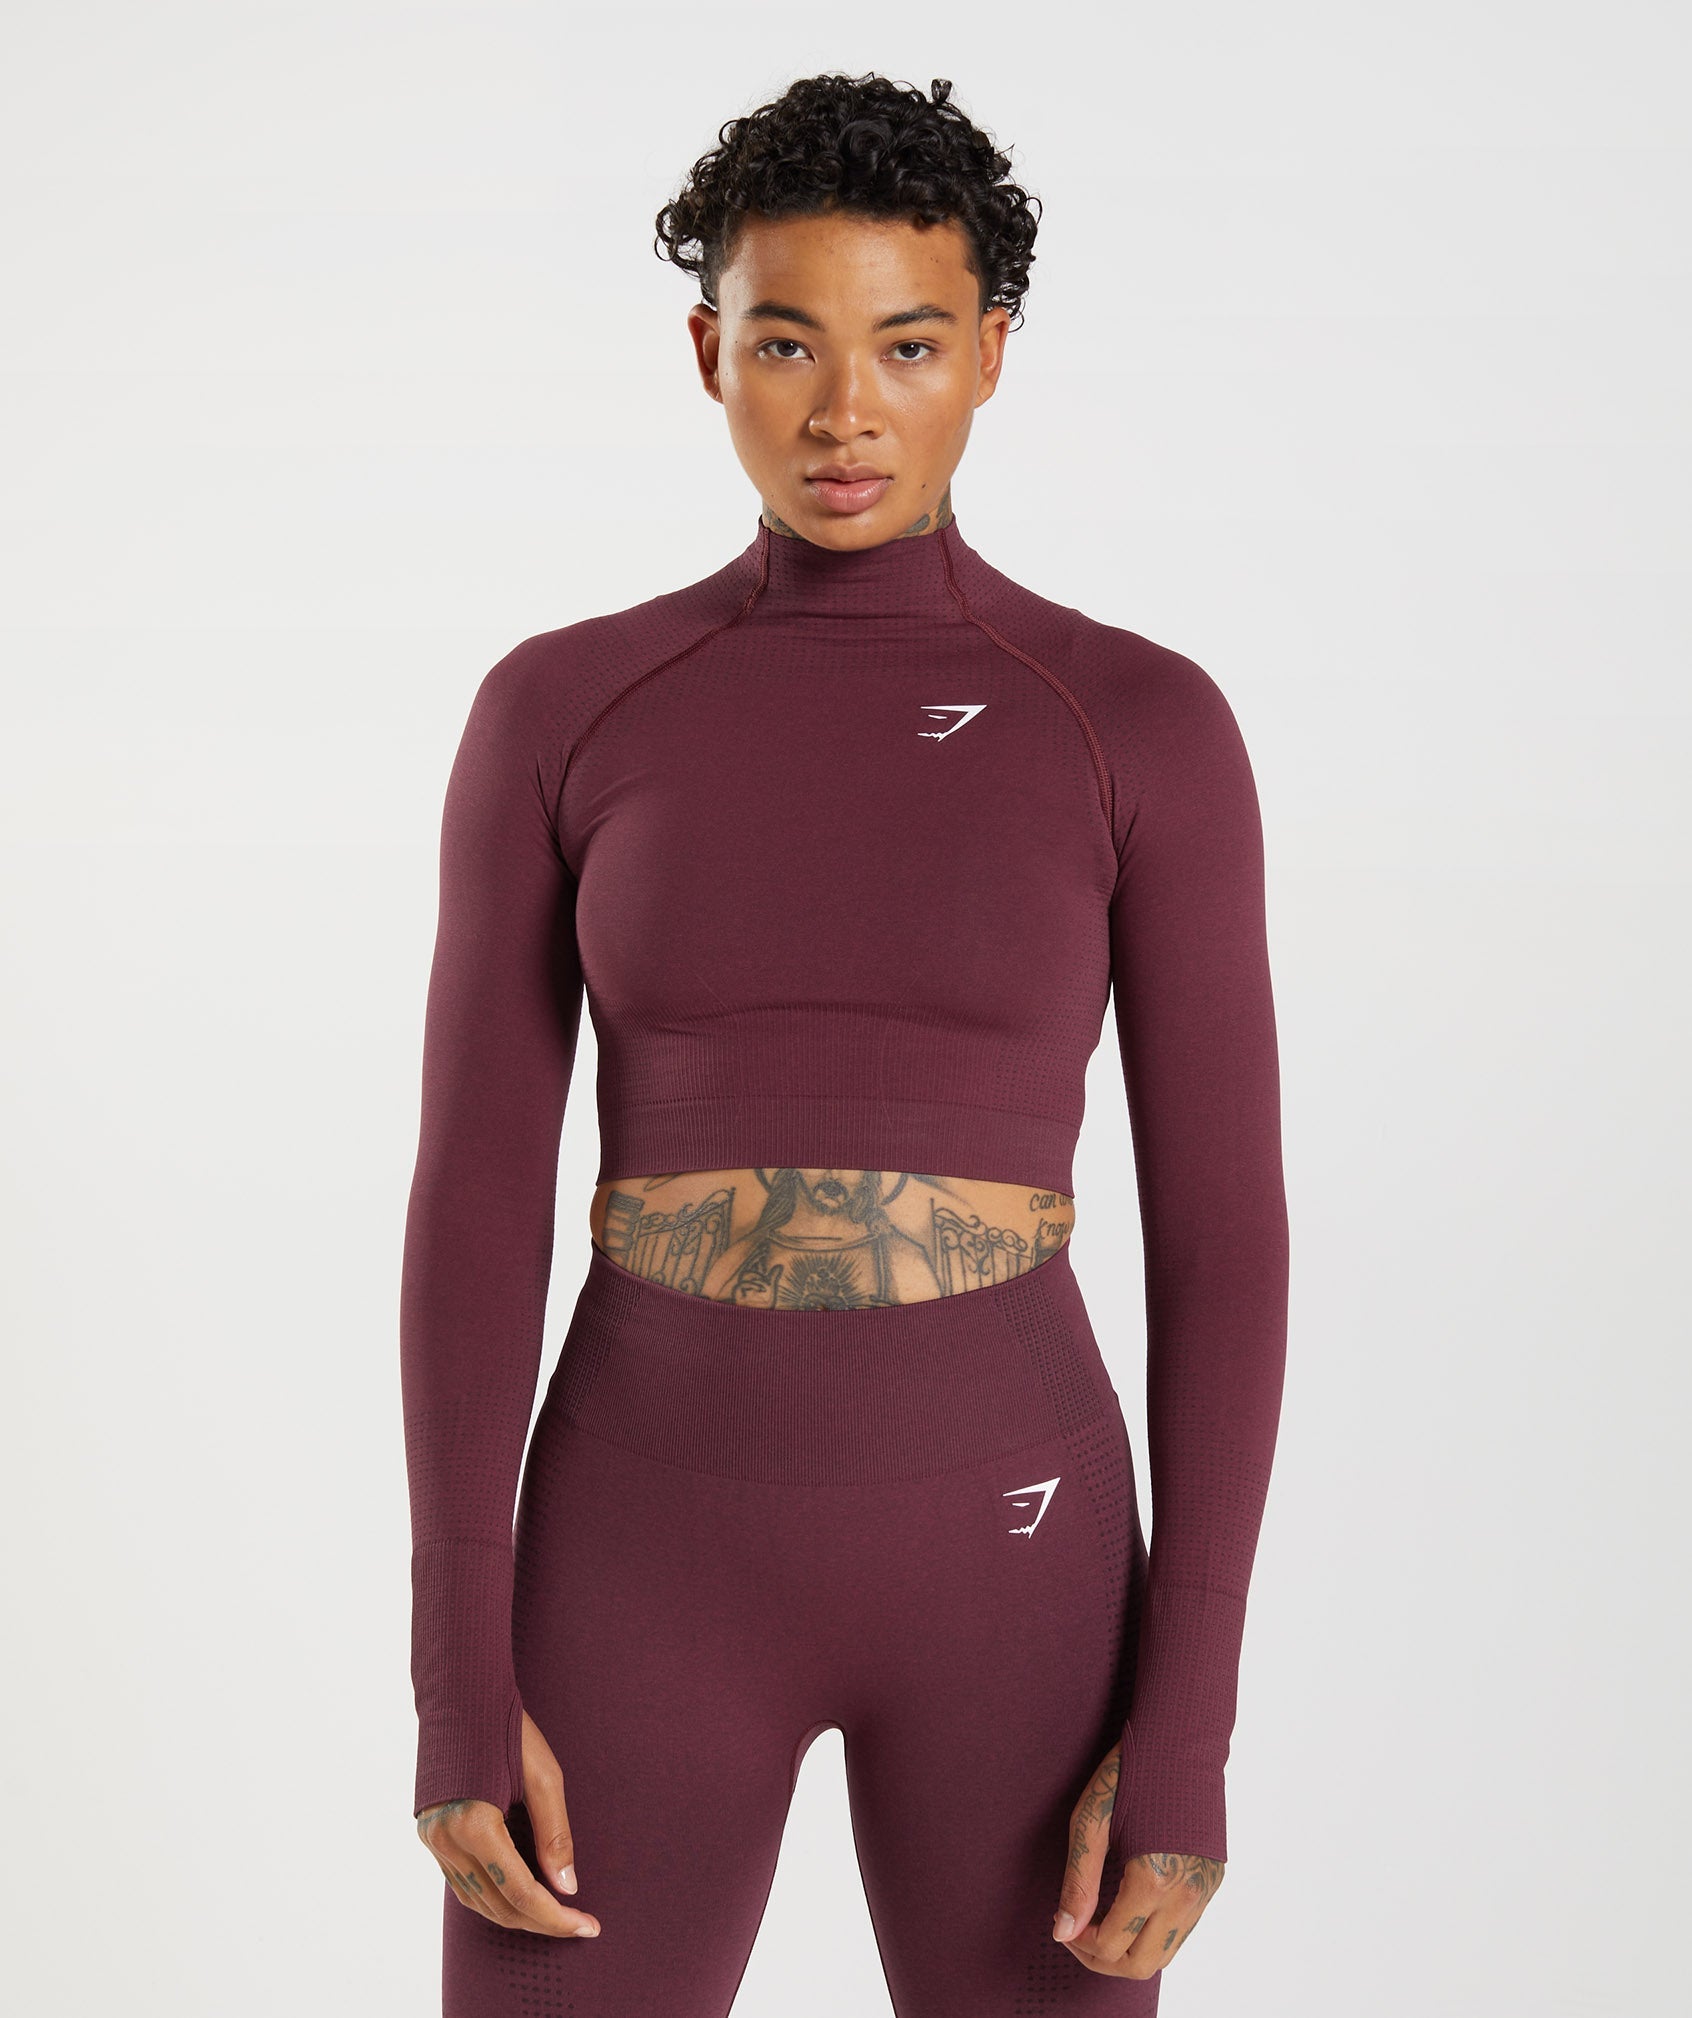 Vital Seamless 2.0 High Neck Midi Top in Baked Maroon Marl - view 1